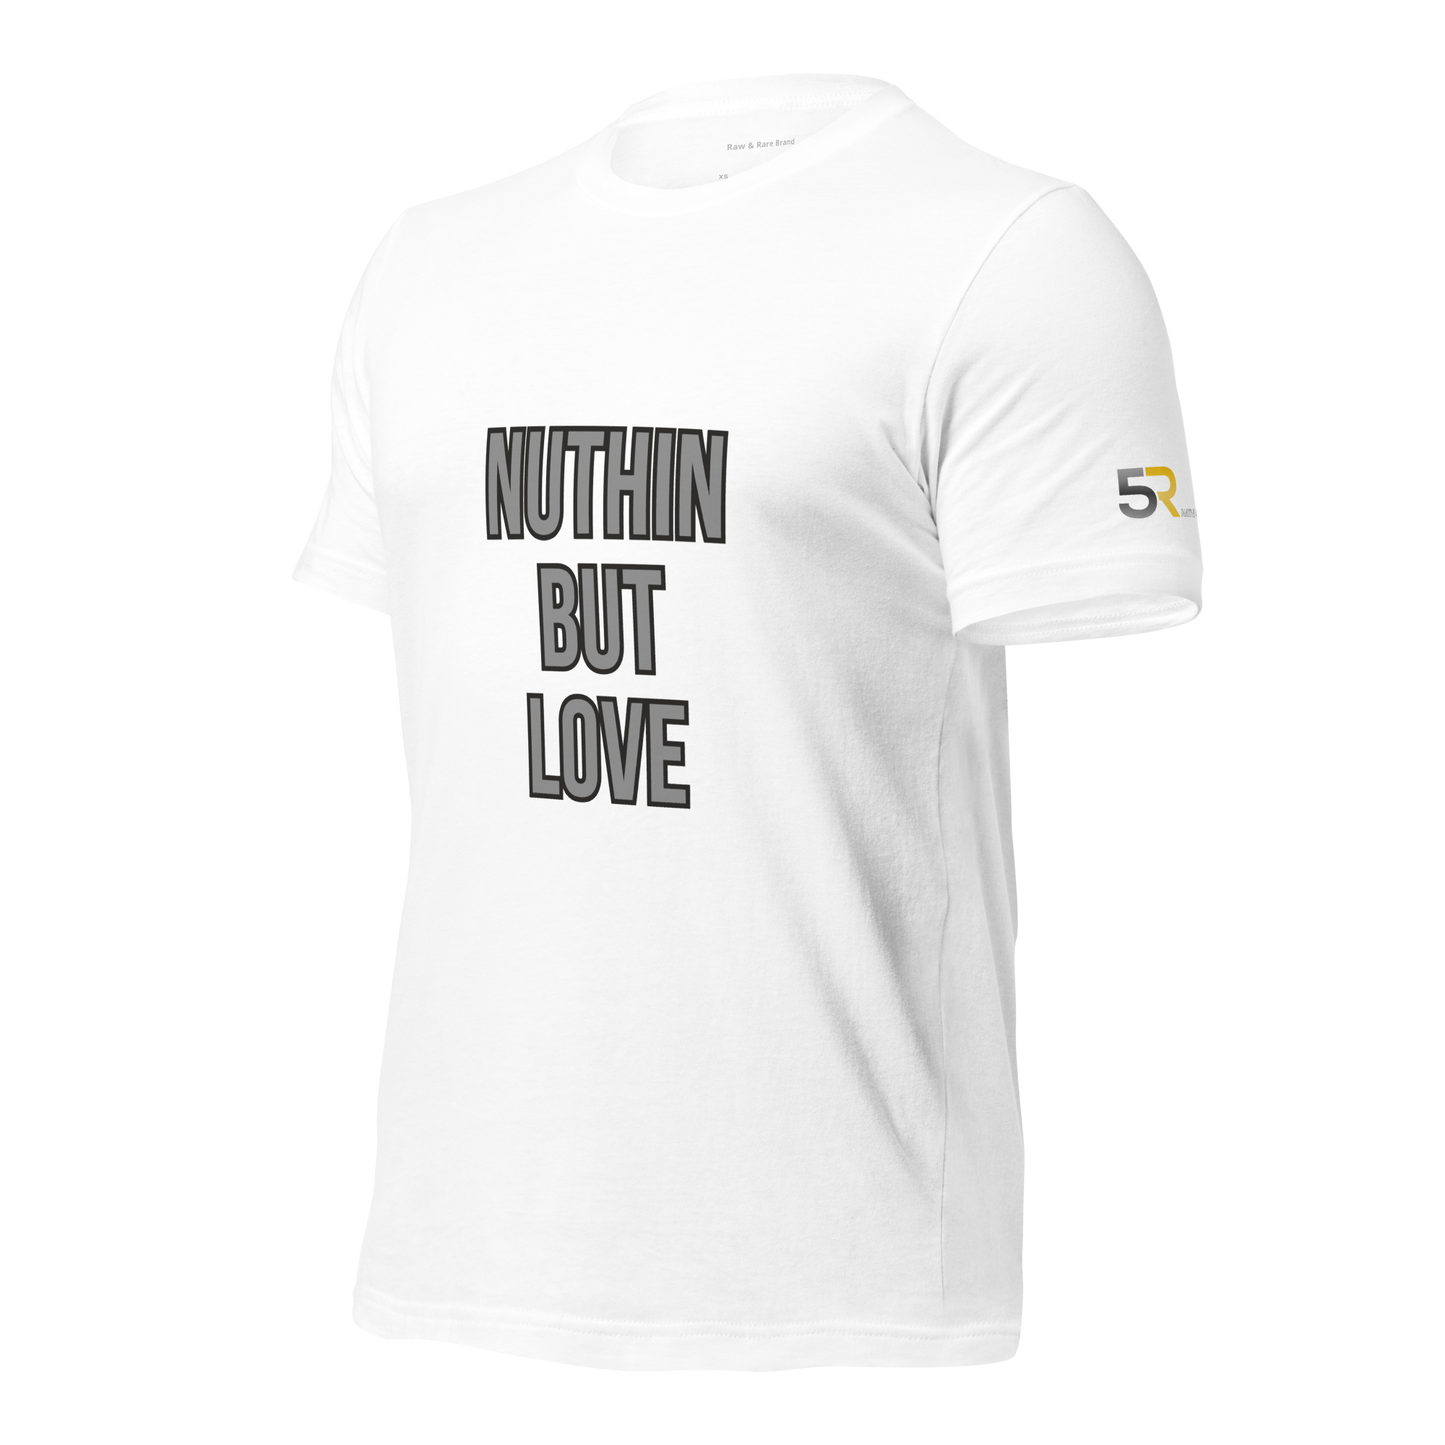 Nuthin But Love T-Shirt